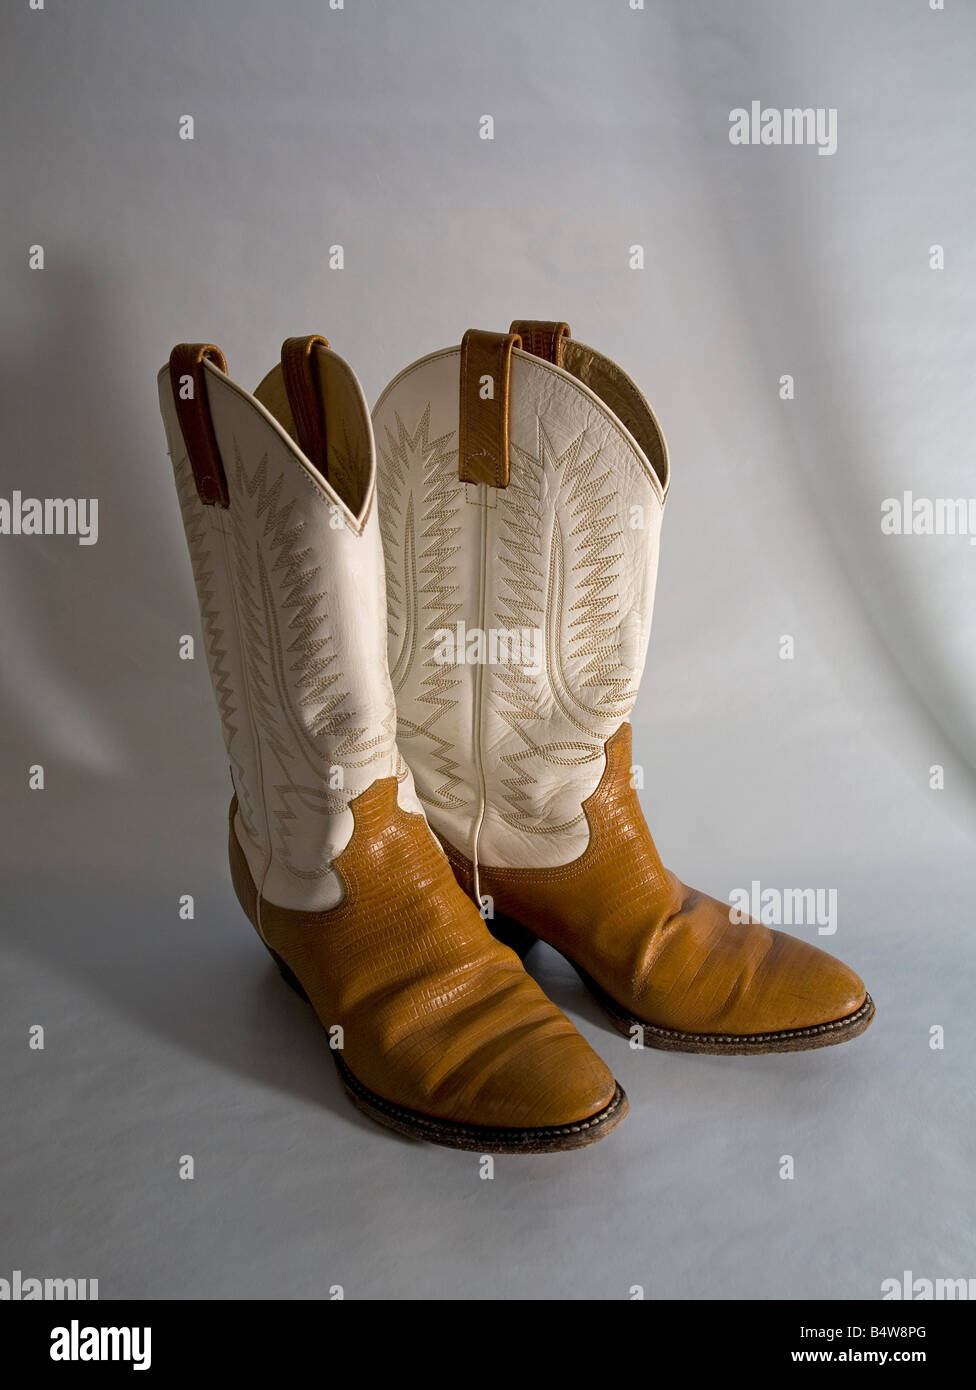 Pointed Boots High Resolution Stock Photography and Images - Alamy